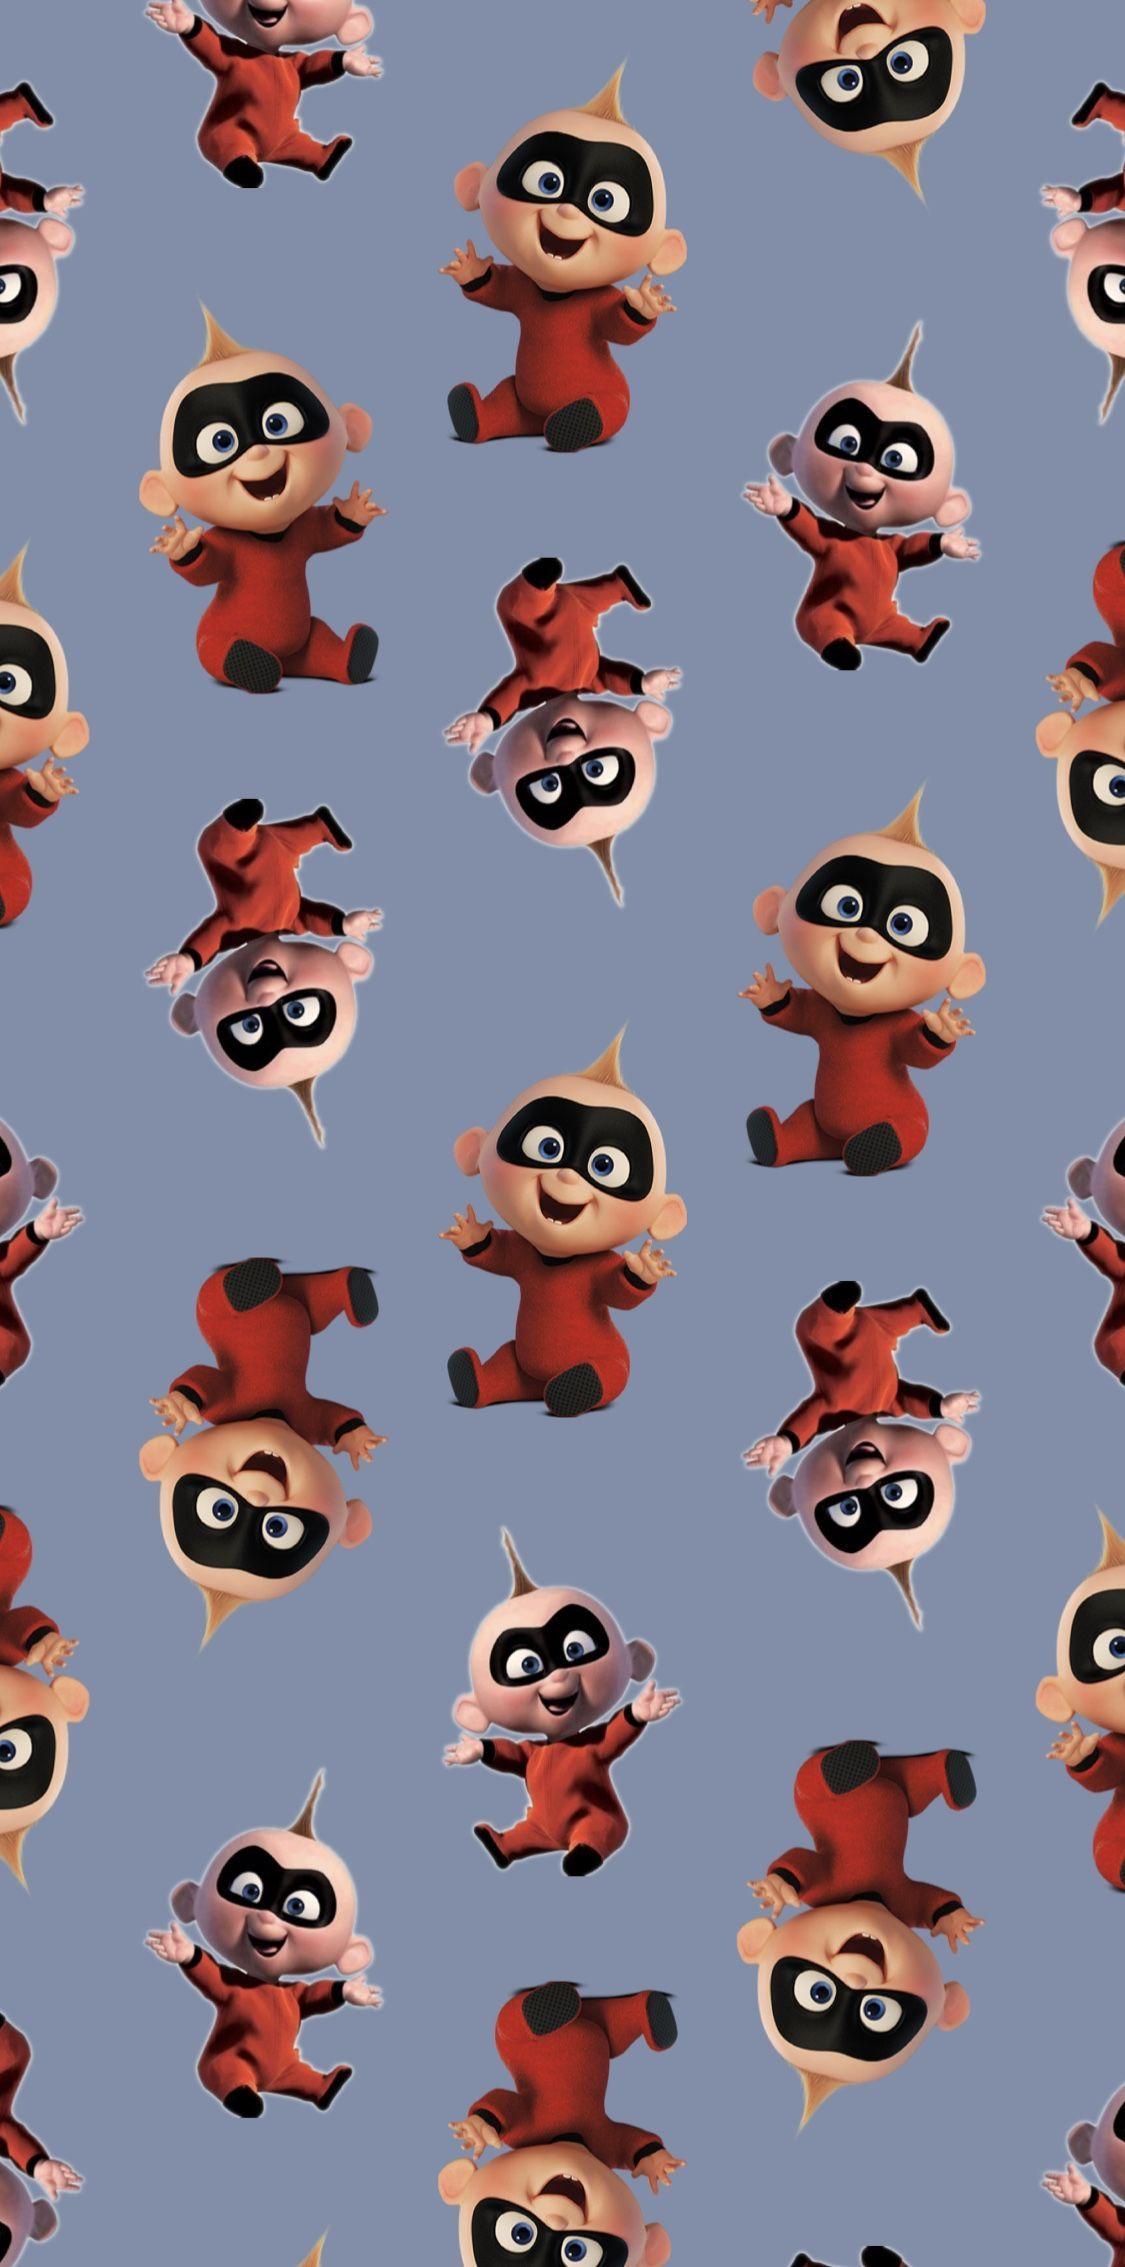 Jack Jack Parr And Elastigirl The Incredibles 2 Wallpapers